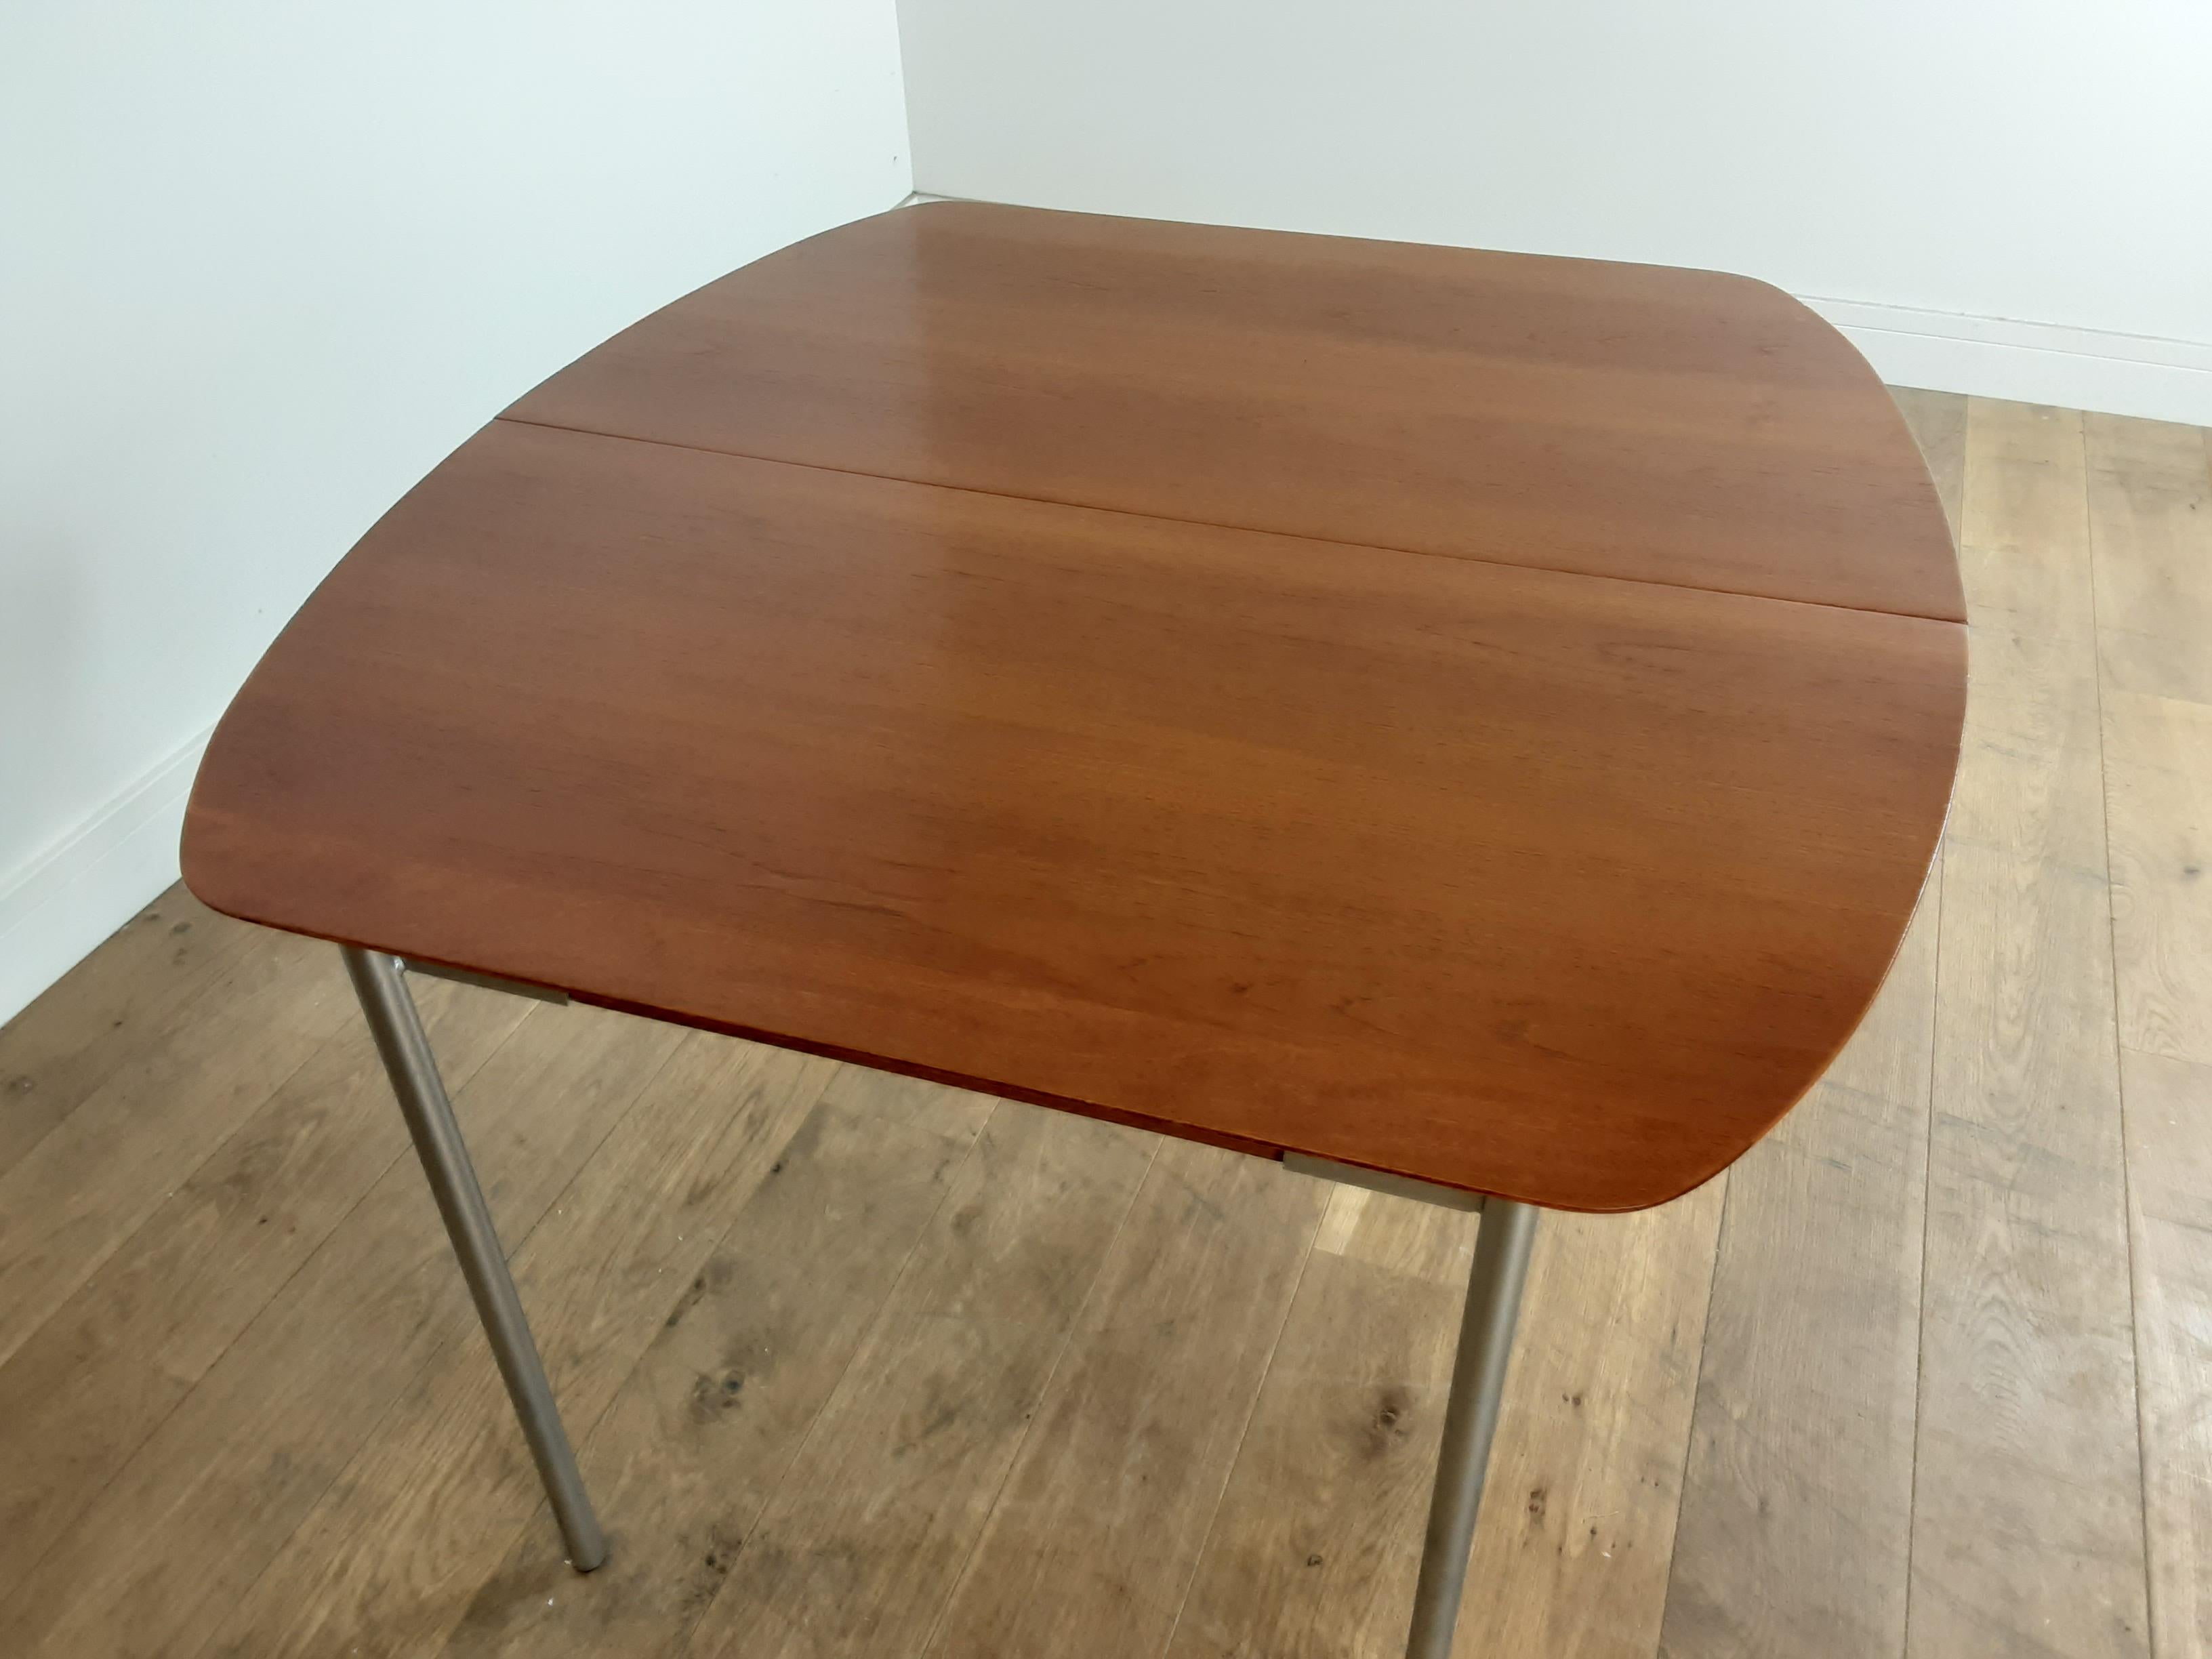 Midcentury Teak Dining Table and 4 Chairs by John and Sylvia Reid for Stag For Sale 1